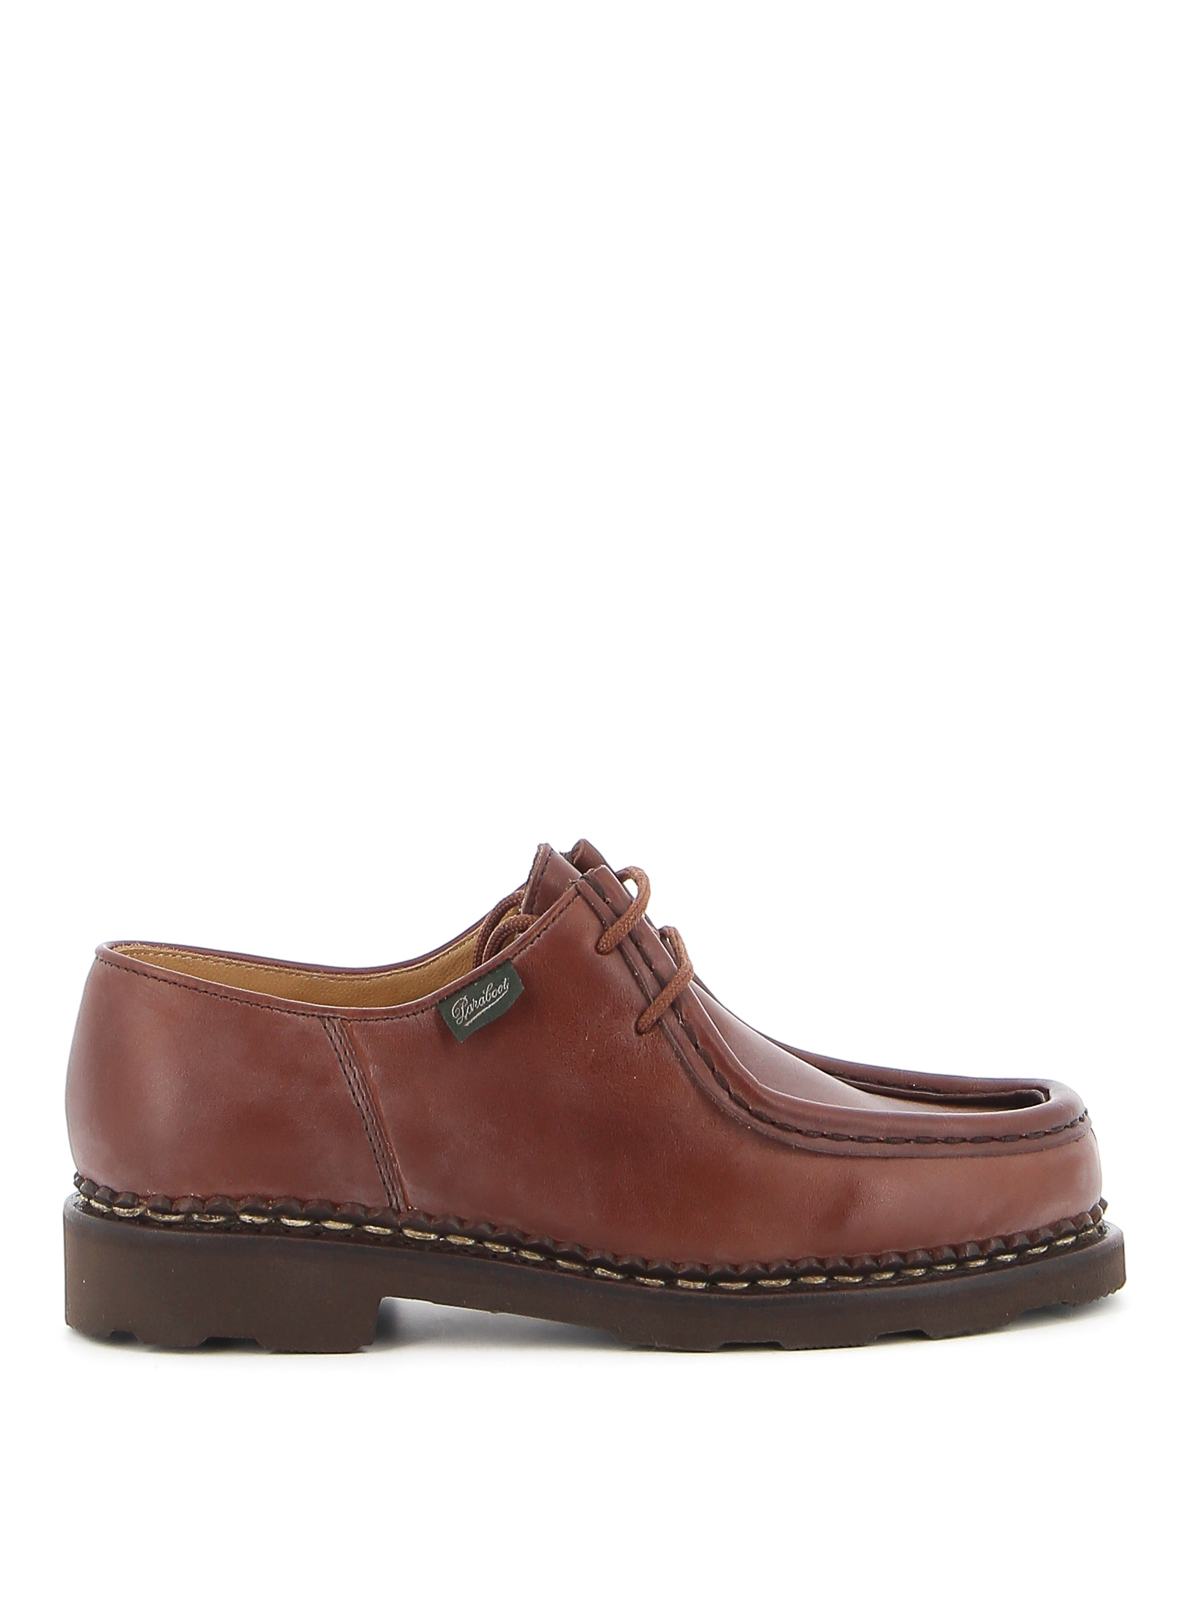 Lace-ups shoes Paraboot - Michael smooth leather shoes - MICHAEL721203